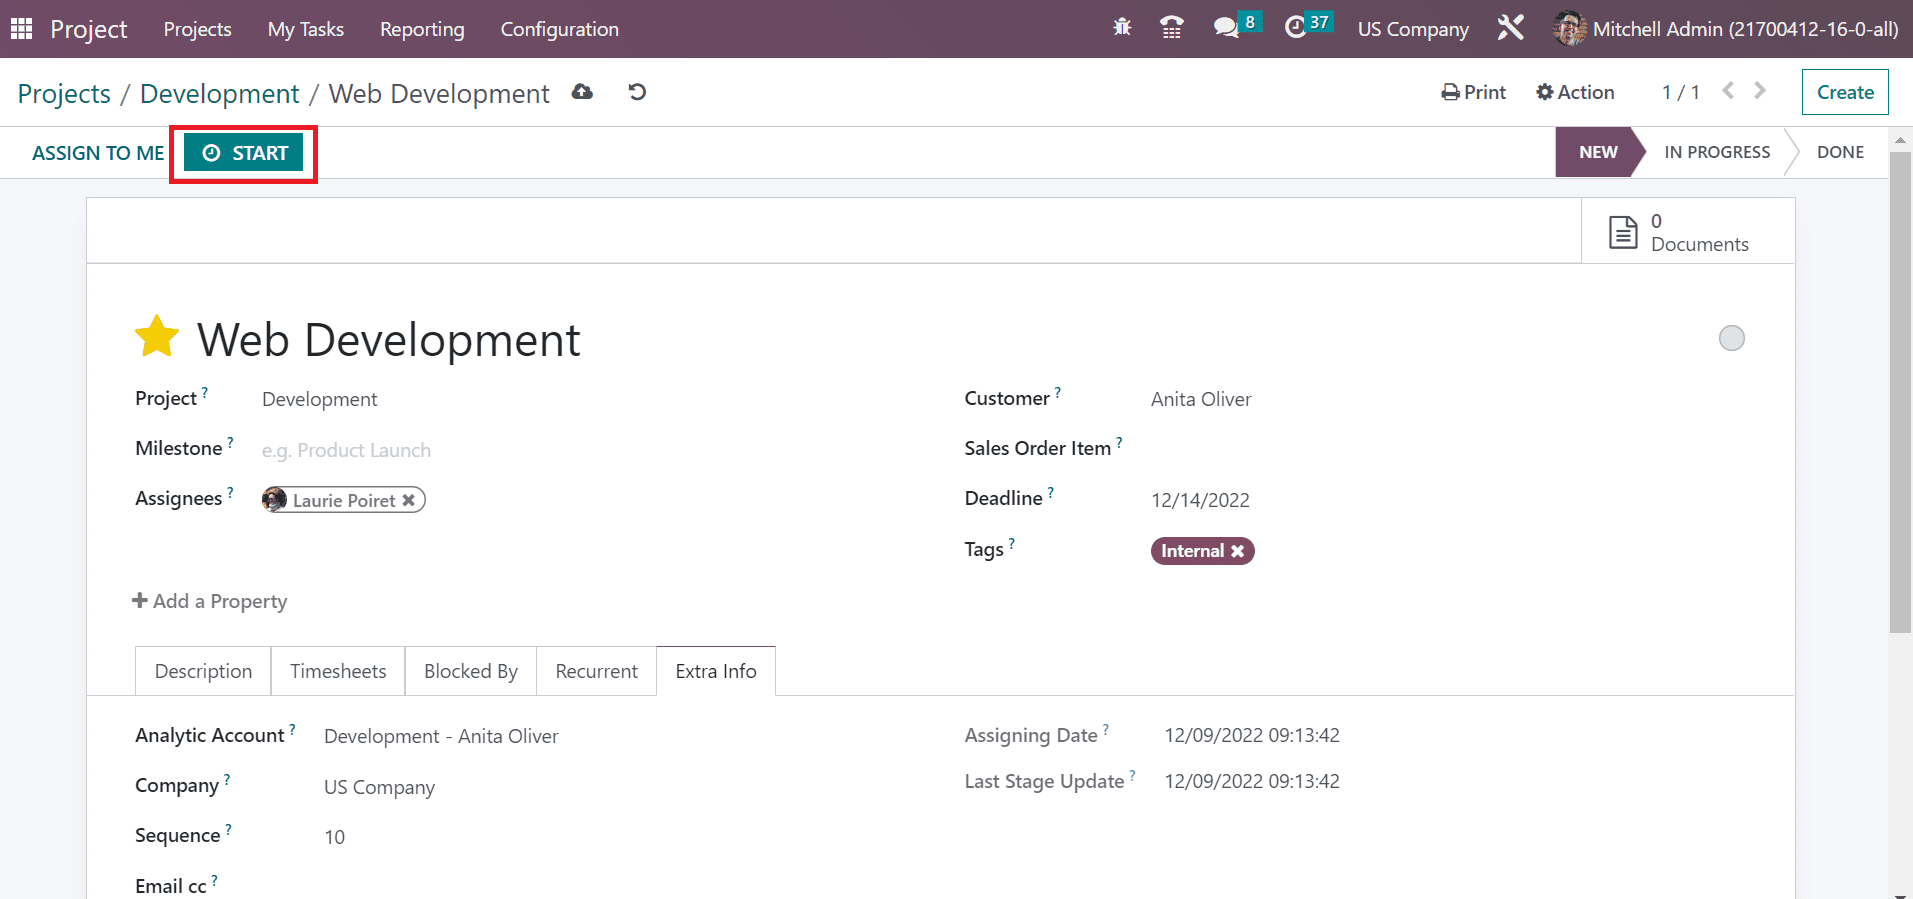 How to Configure Projects in a Usa Company Using Odoo 16?